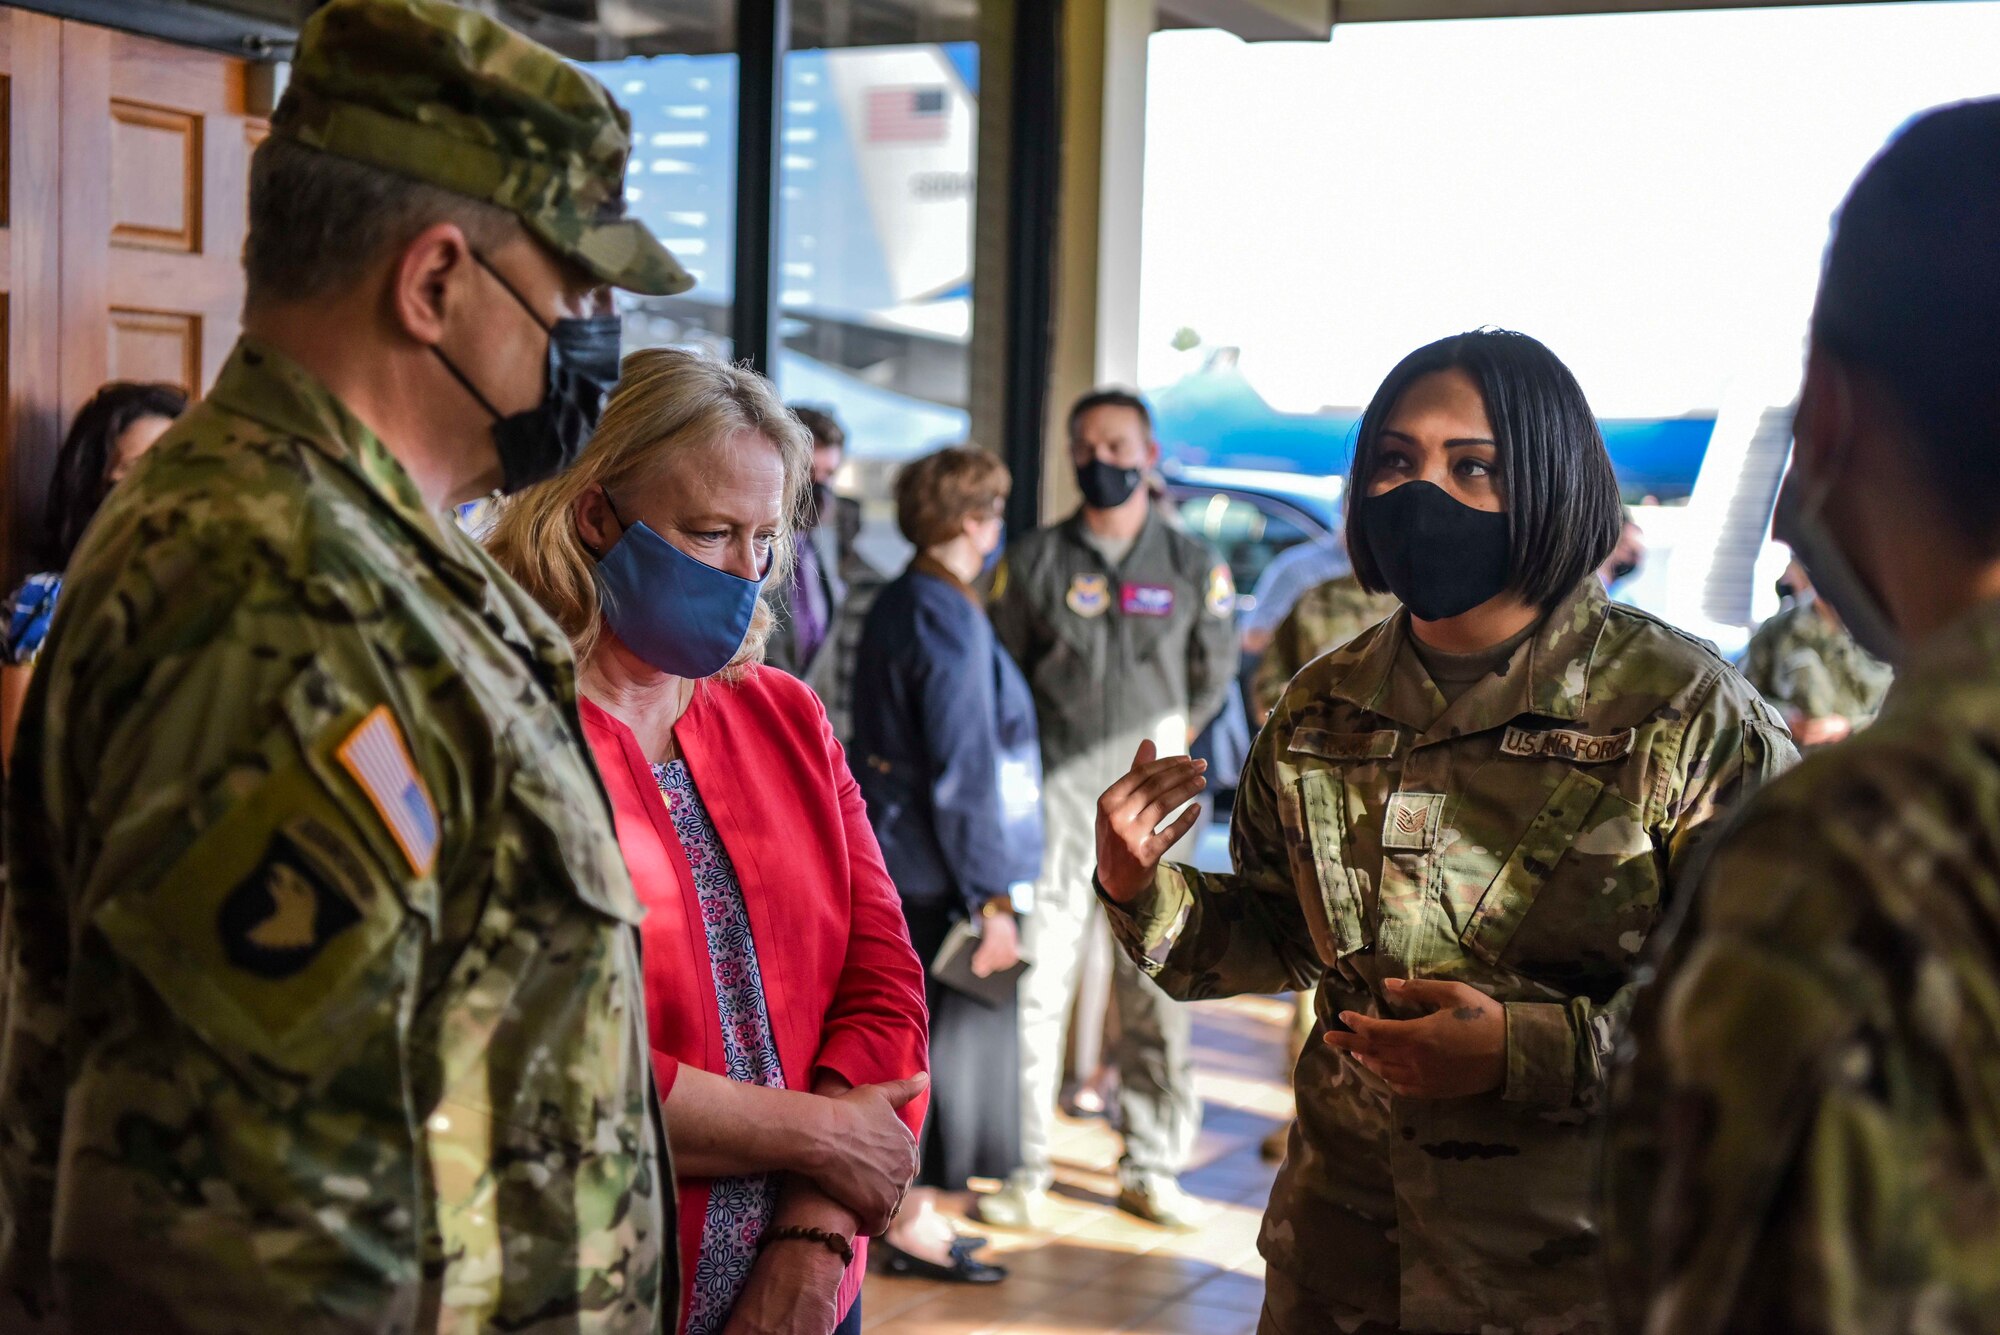 The Chairman of the Joint Chiefs of Staff U.S. Army Gen. Mark A. Milley speaks with members of the 15th Medical Group at Hickam Field on Joint Base Pearl Harbor-Hickam, Hawaii.